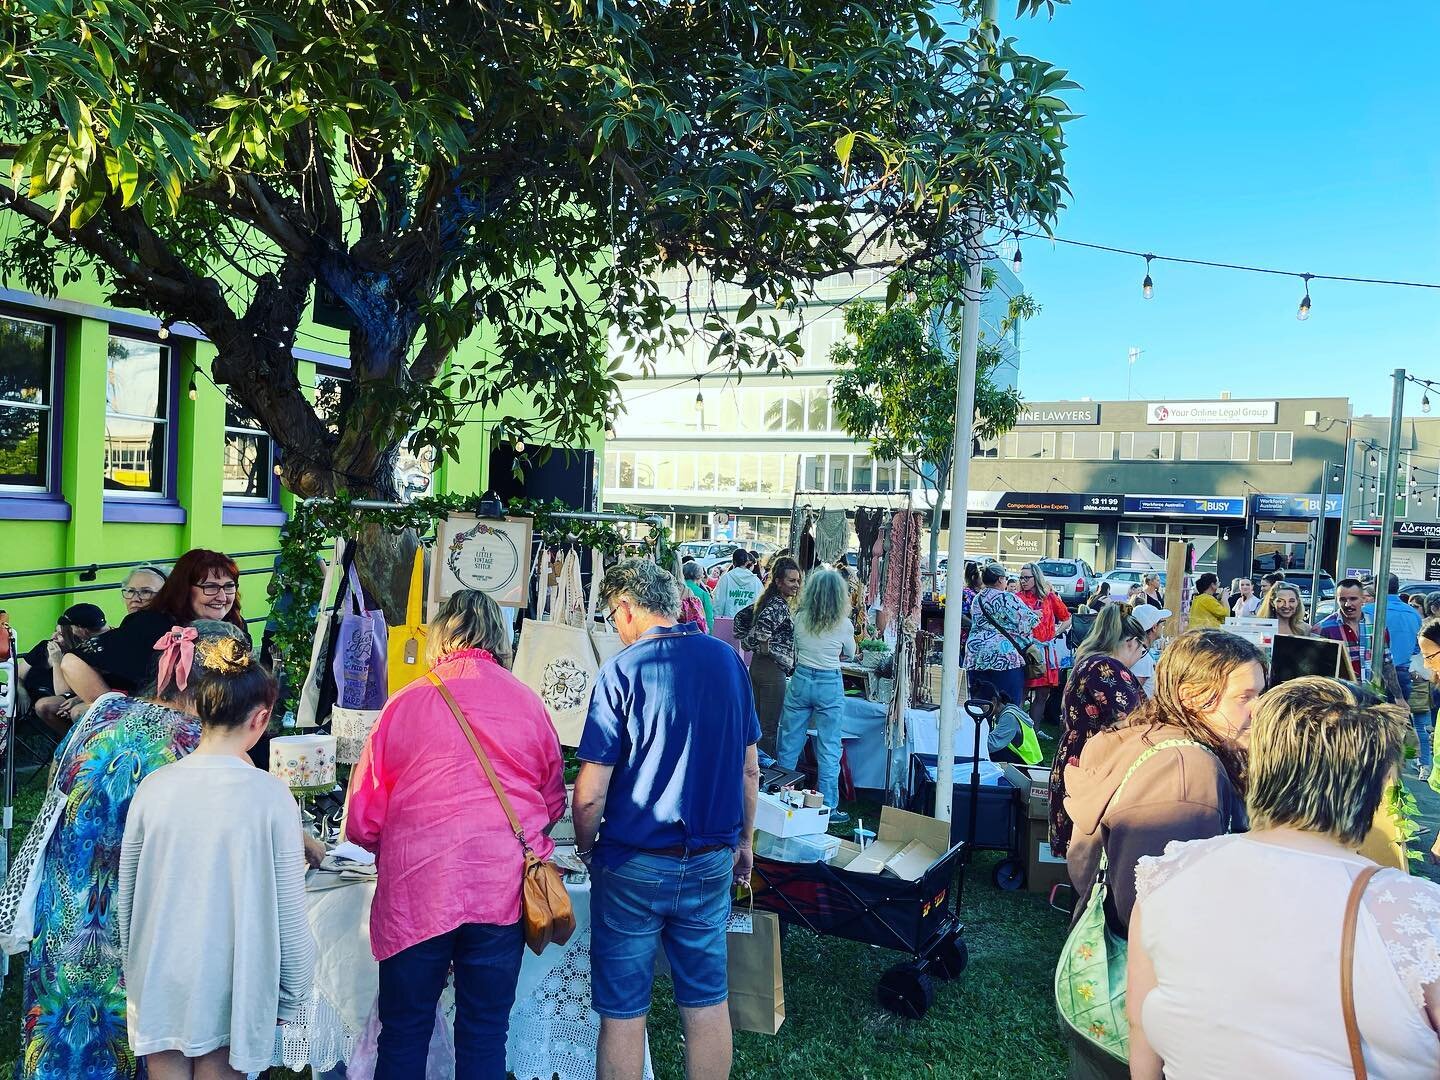 Markets were packed this afternoon! Thanks @brgbundaberg for another great Twilight Market